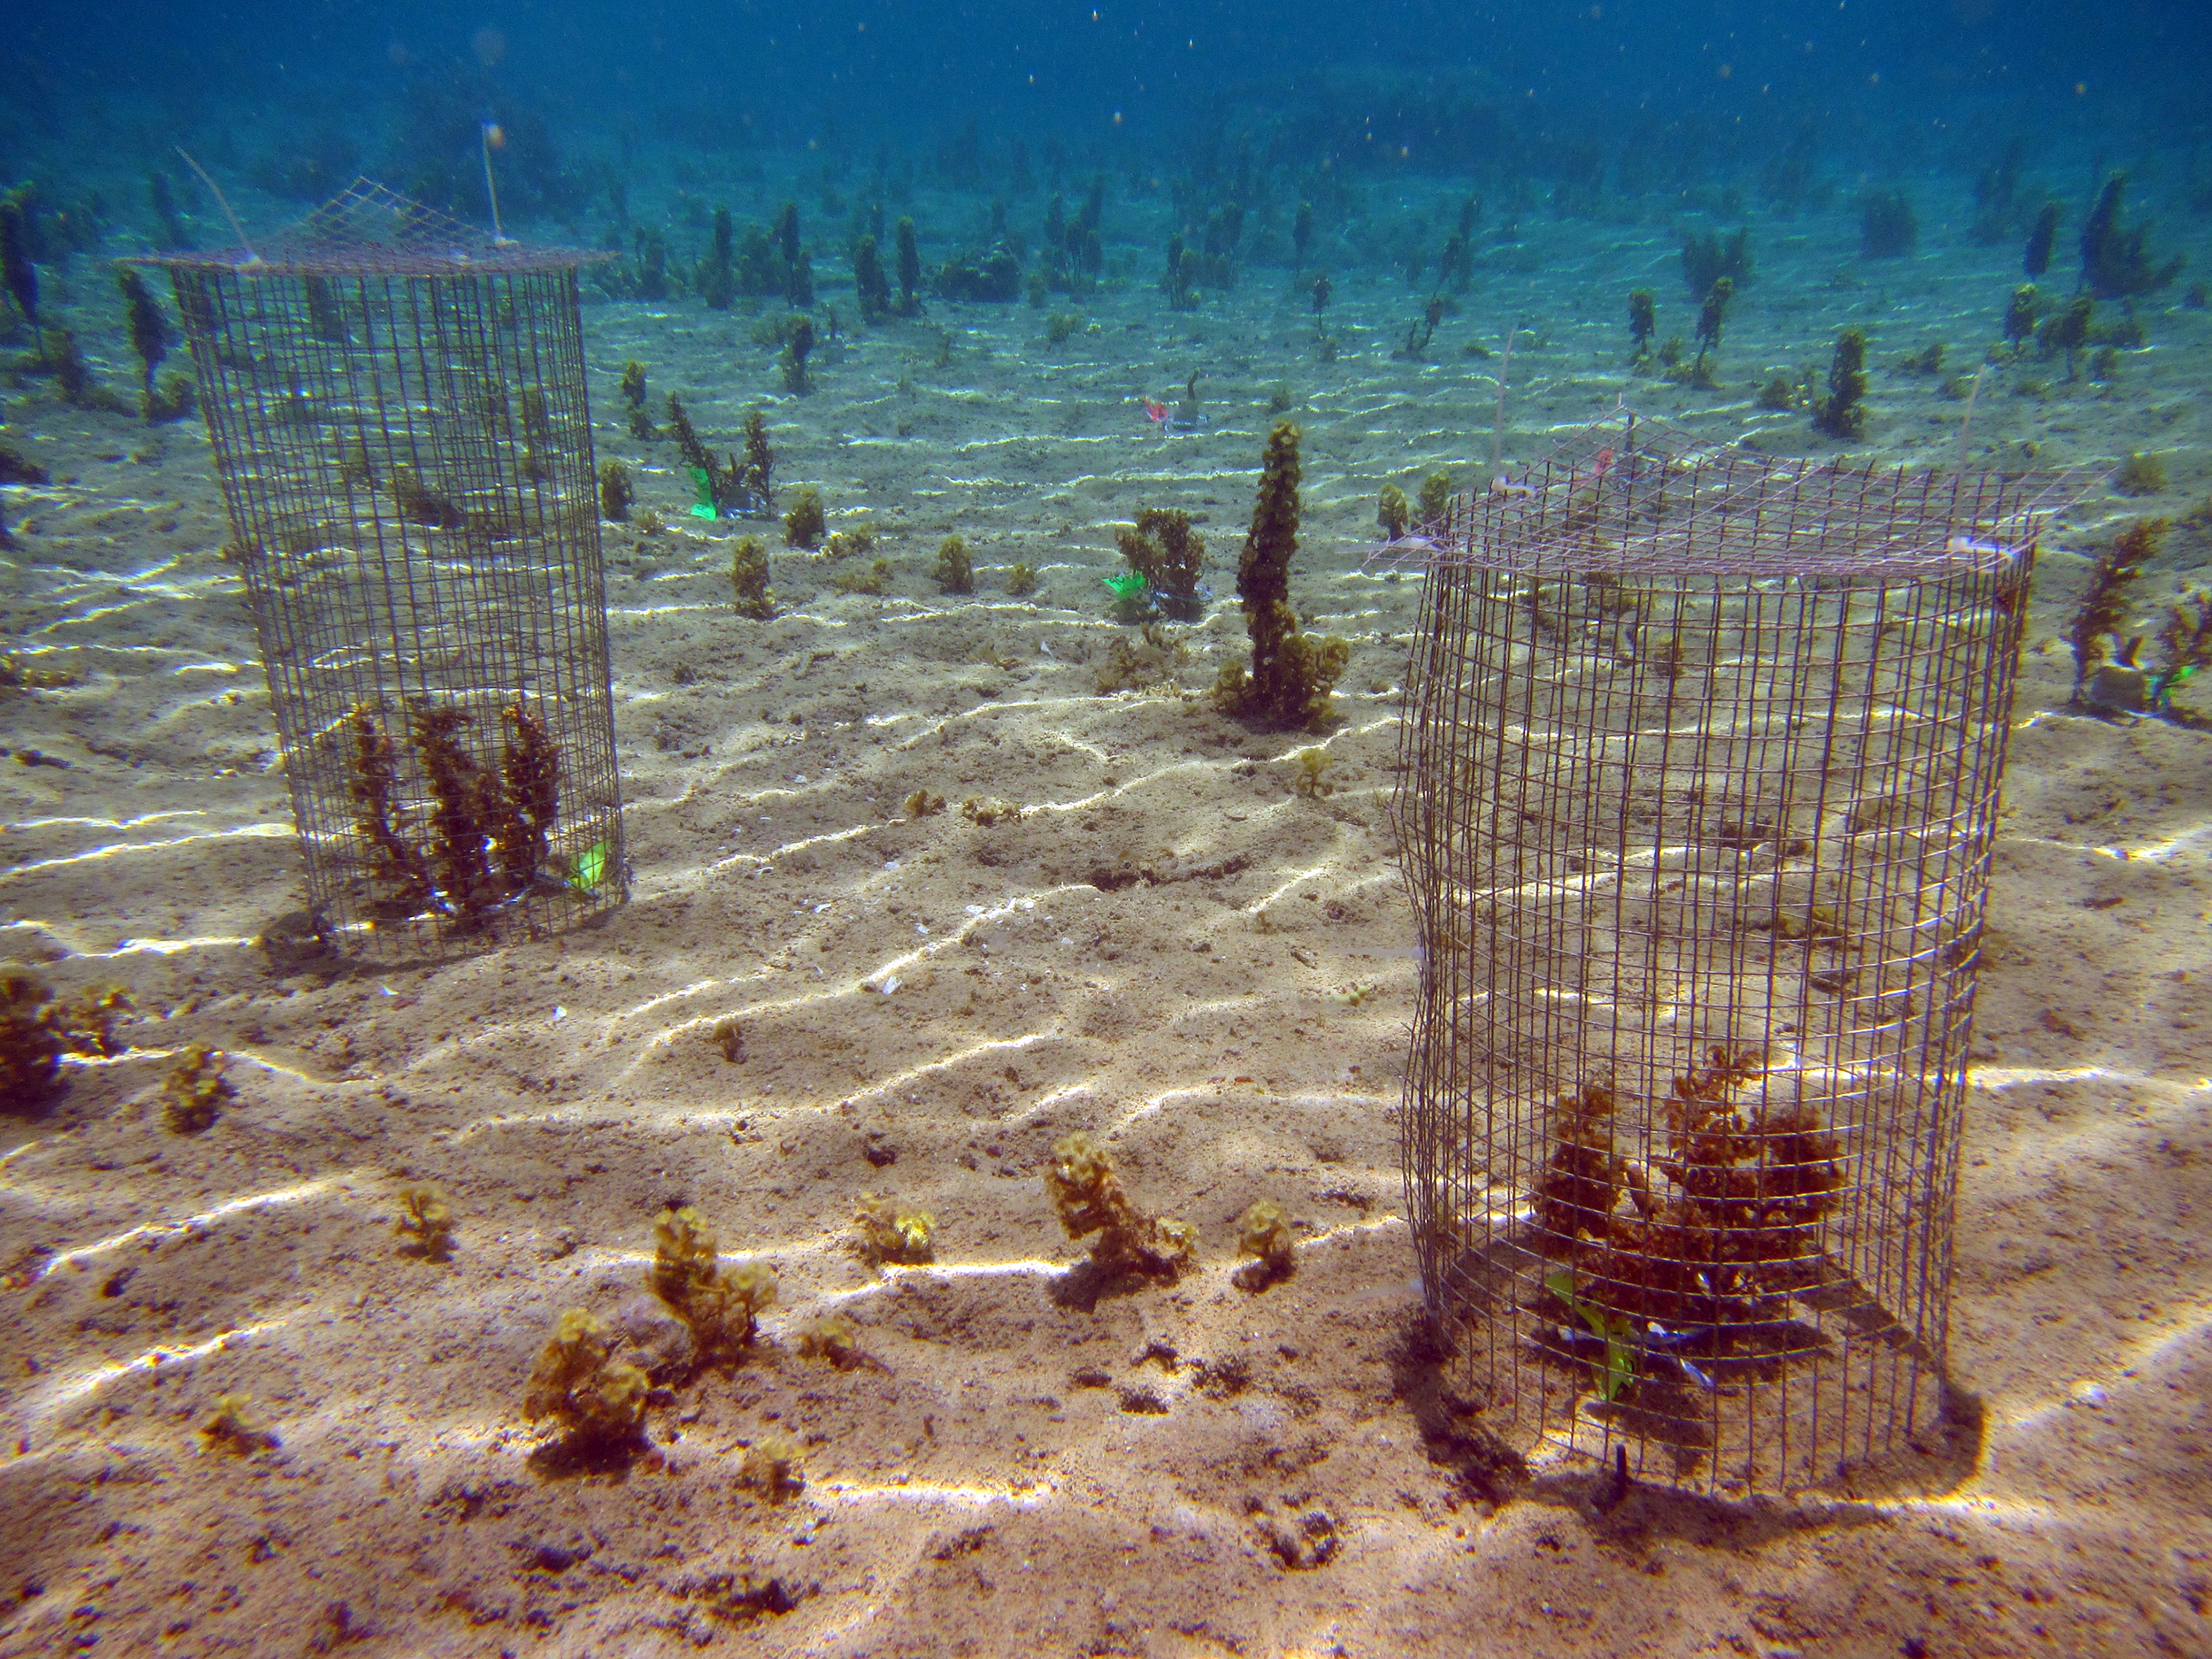 Cages fabricated on the sea floor allow experimentation to understand the role of seaweeds in protecting corals from attack by crown-of-thorns sea stars. (Credit: Cody Clements, Georgia Tech)